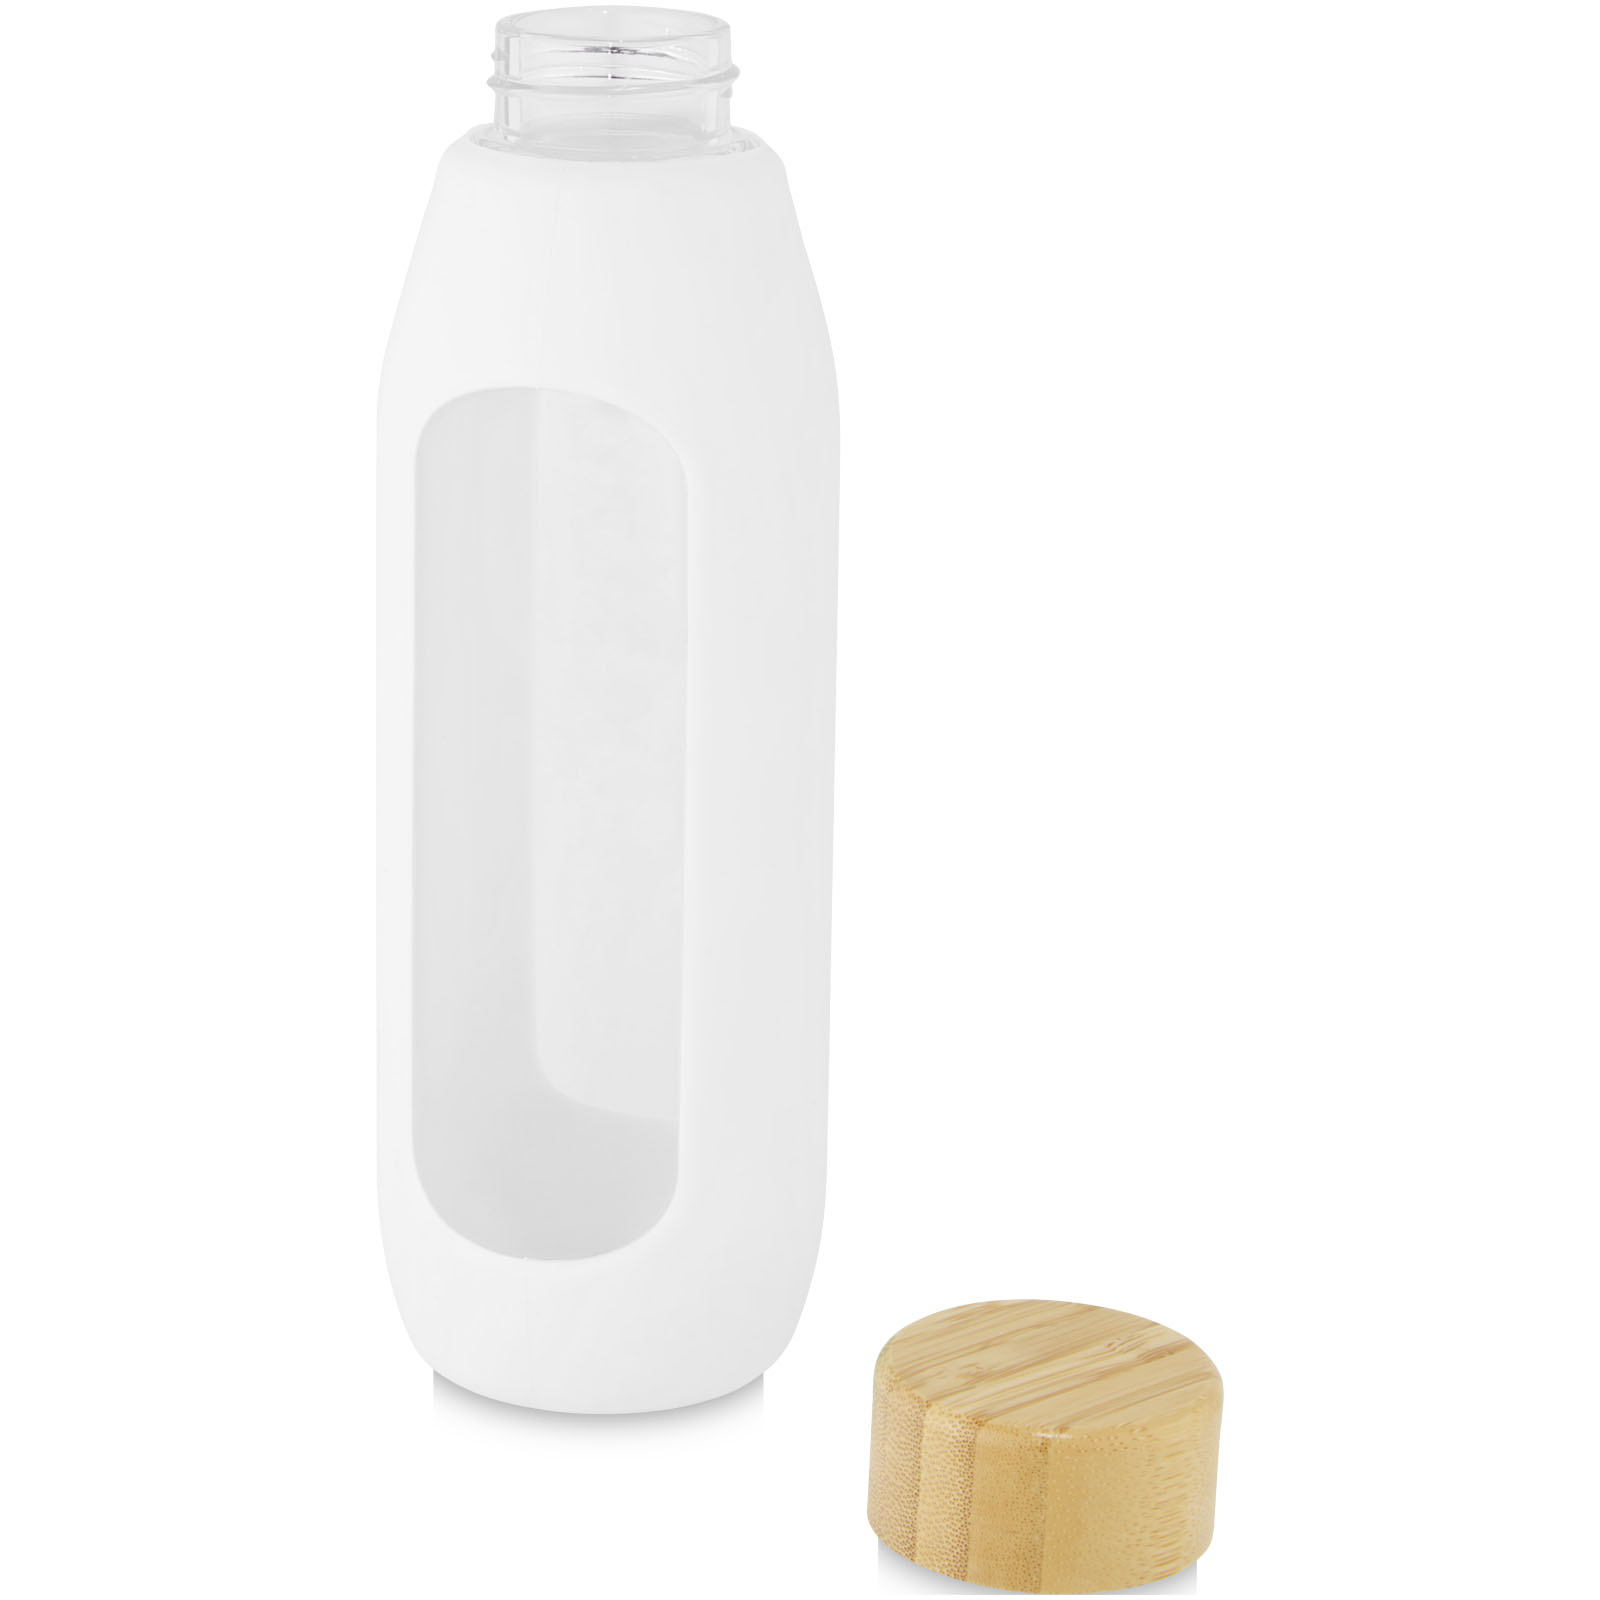 Advertising Water bottles - Tidan 600 ml borosilicate glass bottle with silicone grip - 3